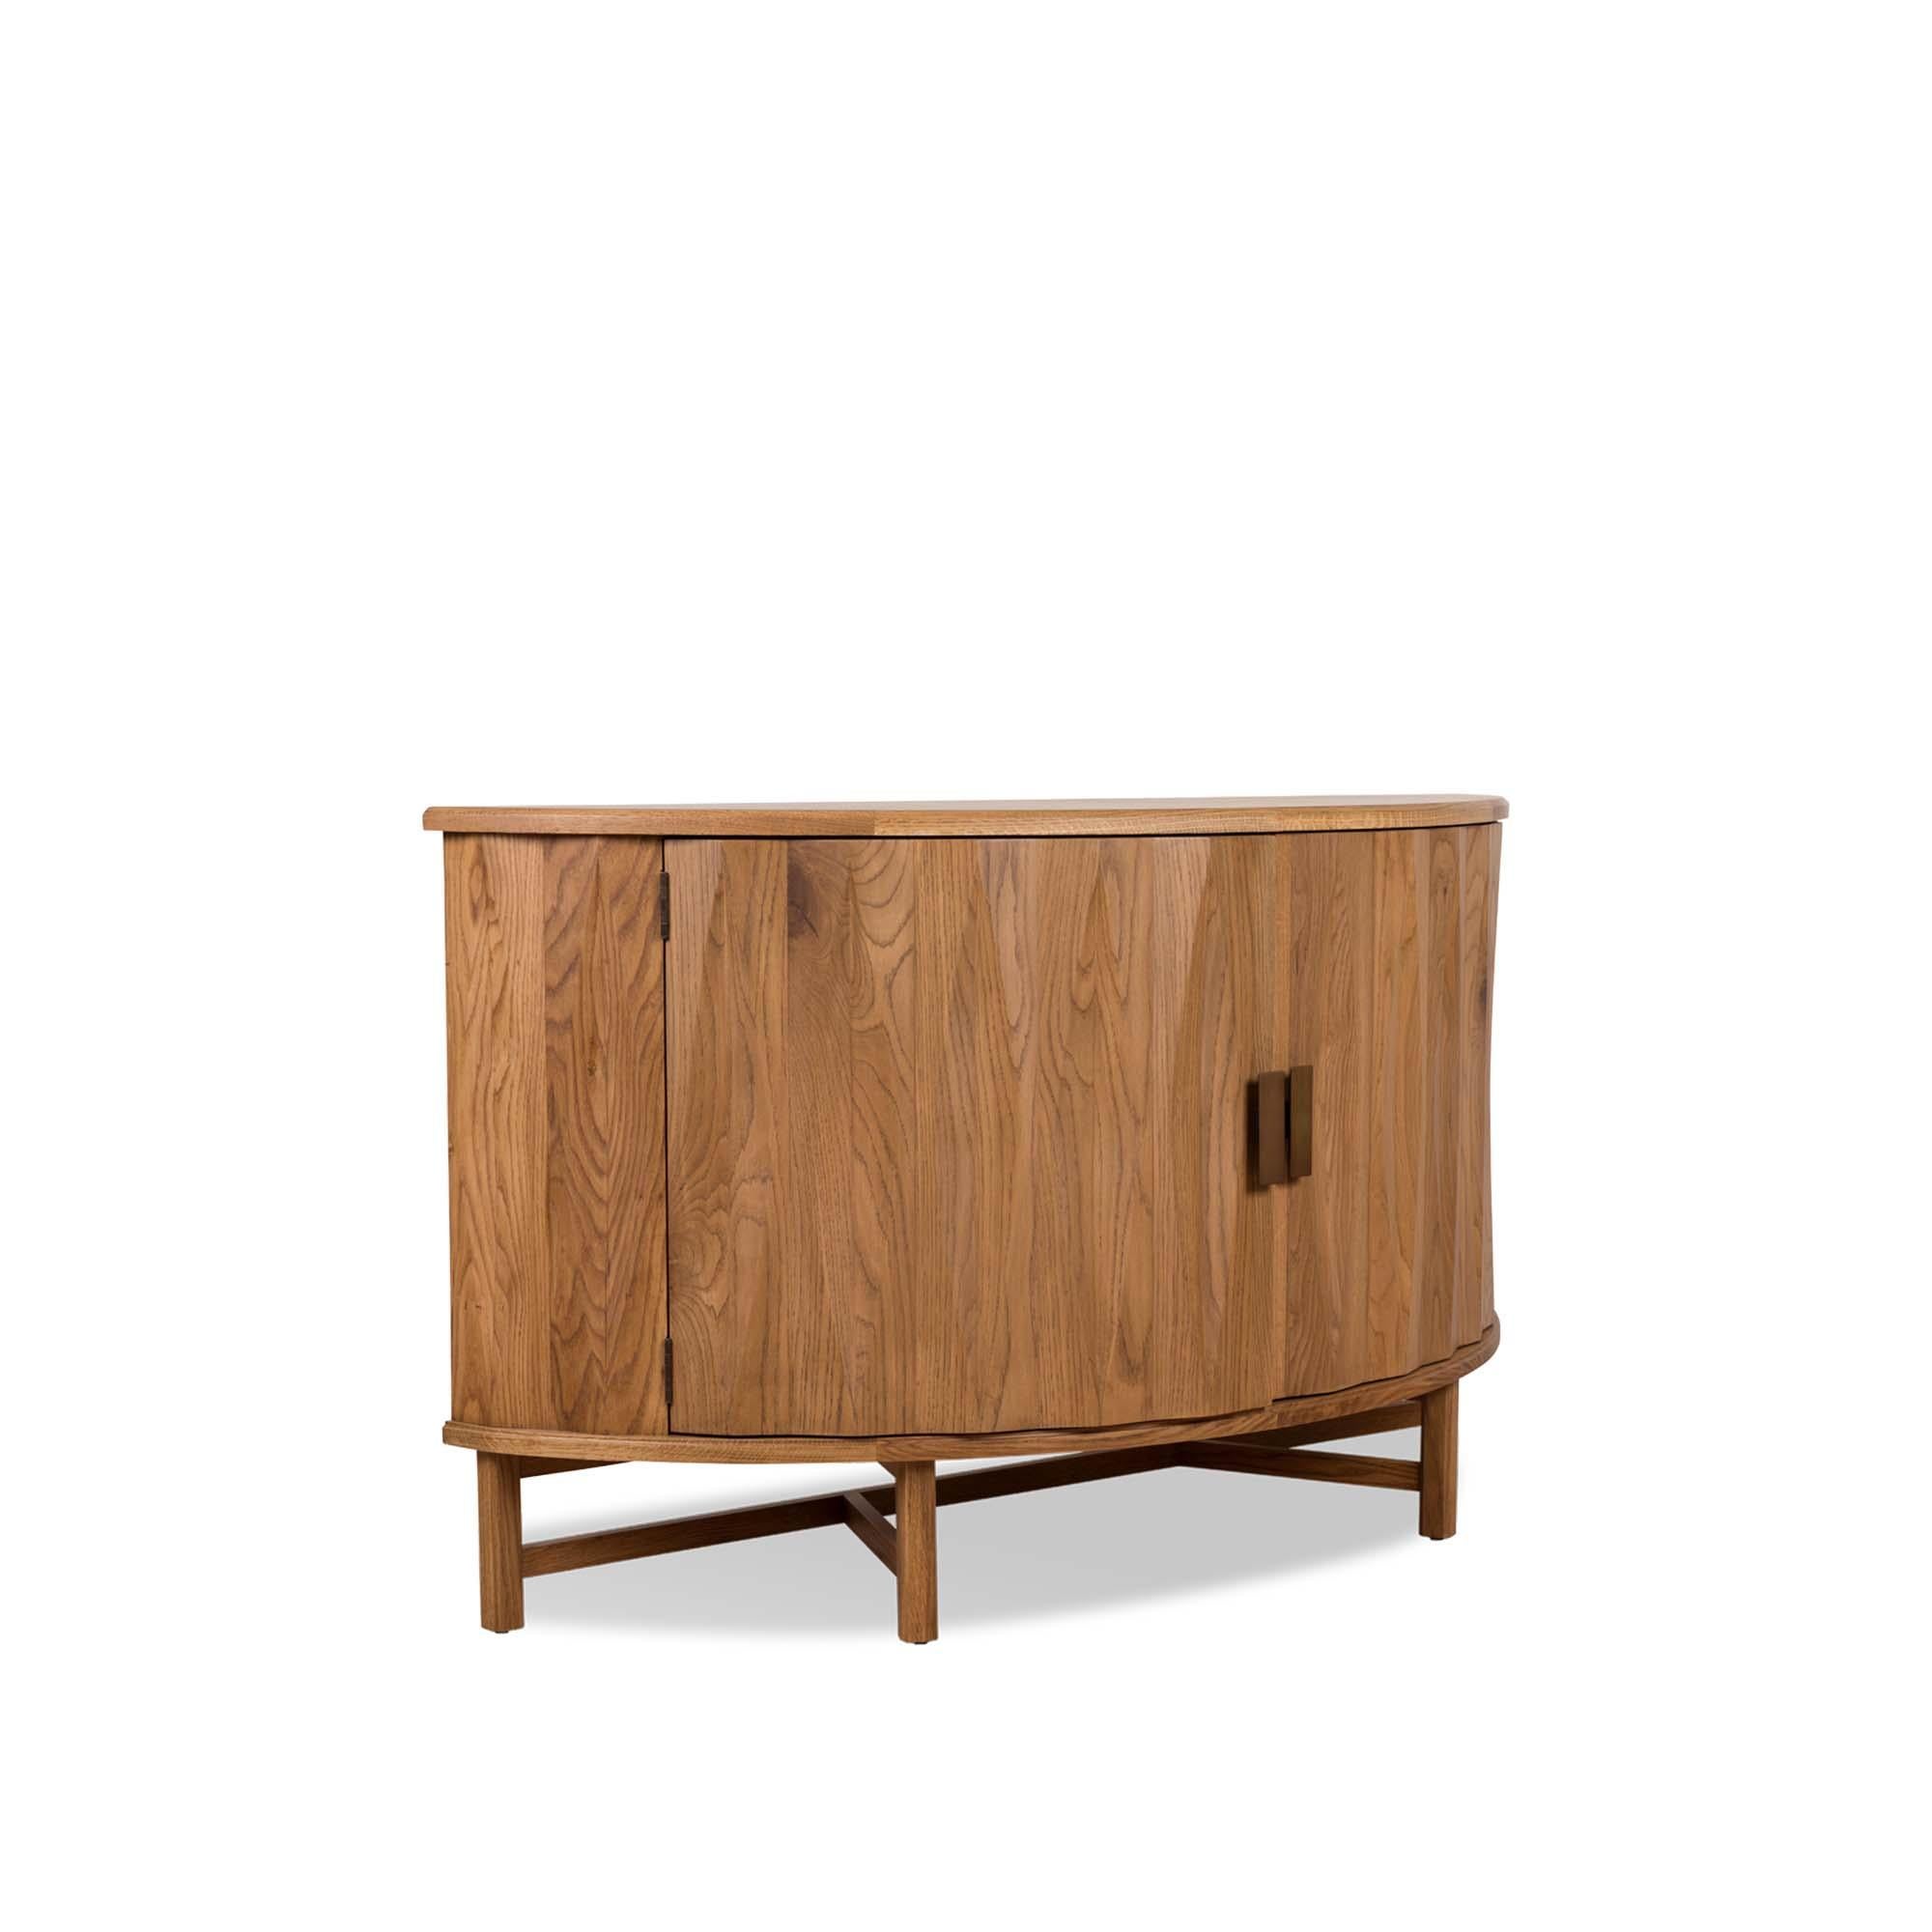 The Griffin console features a demilune shaped case with parquet doors, brass hardware and a sculptural wood base. Available in American walnut or white oak. 

The Lawson-Fenning Collection is designed and handmade in Los Angeles, California. Reach